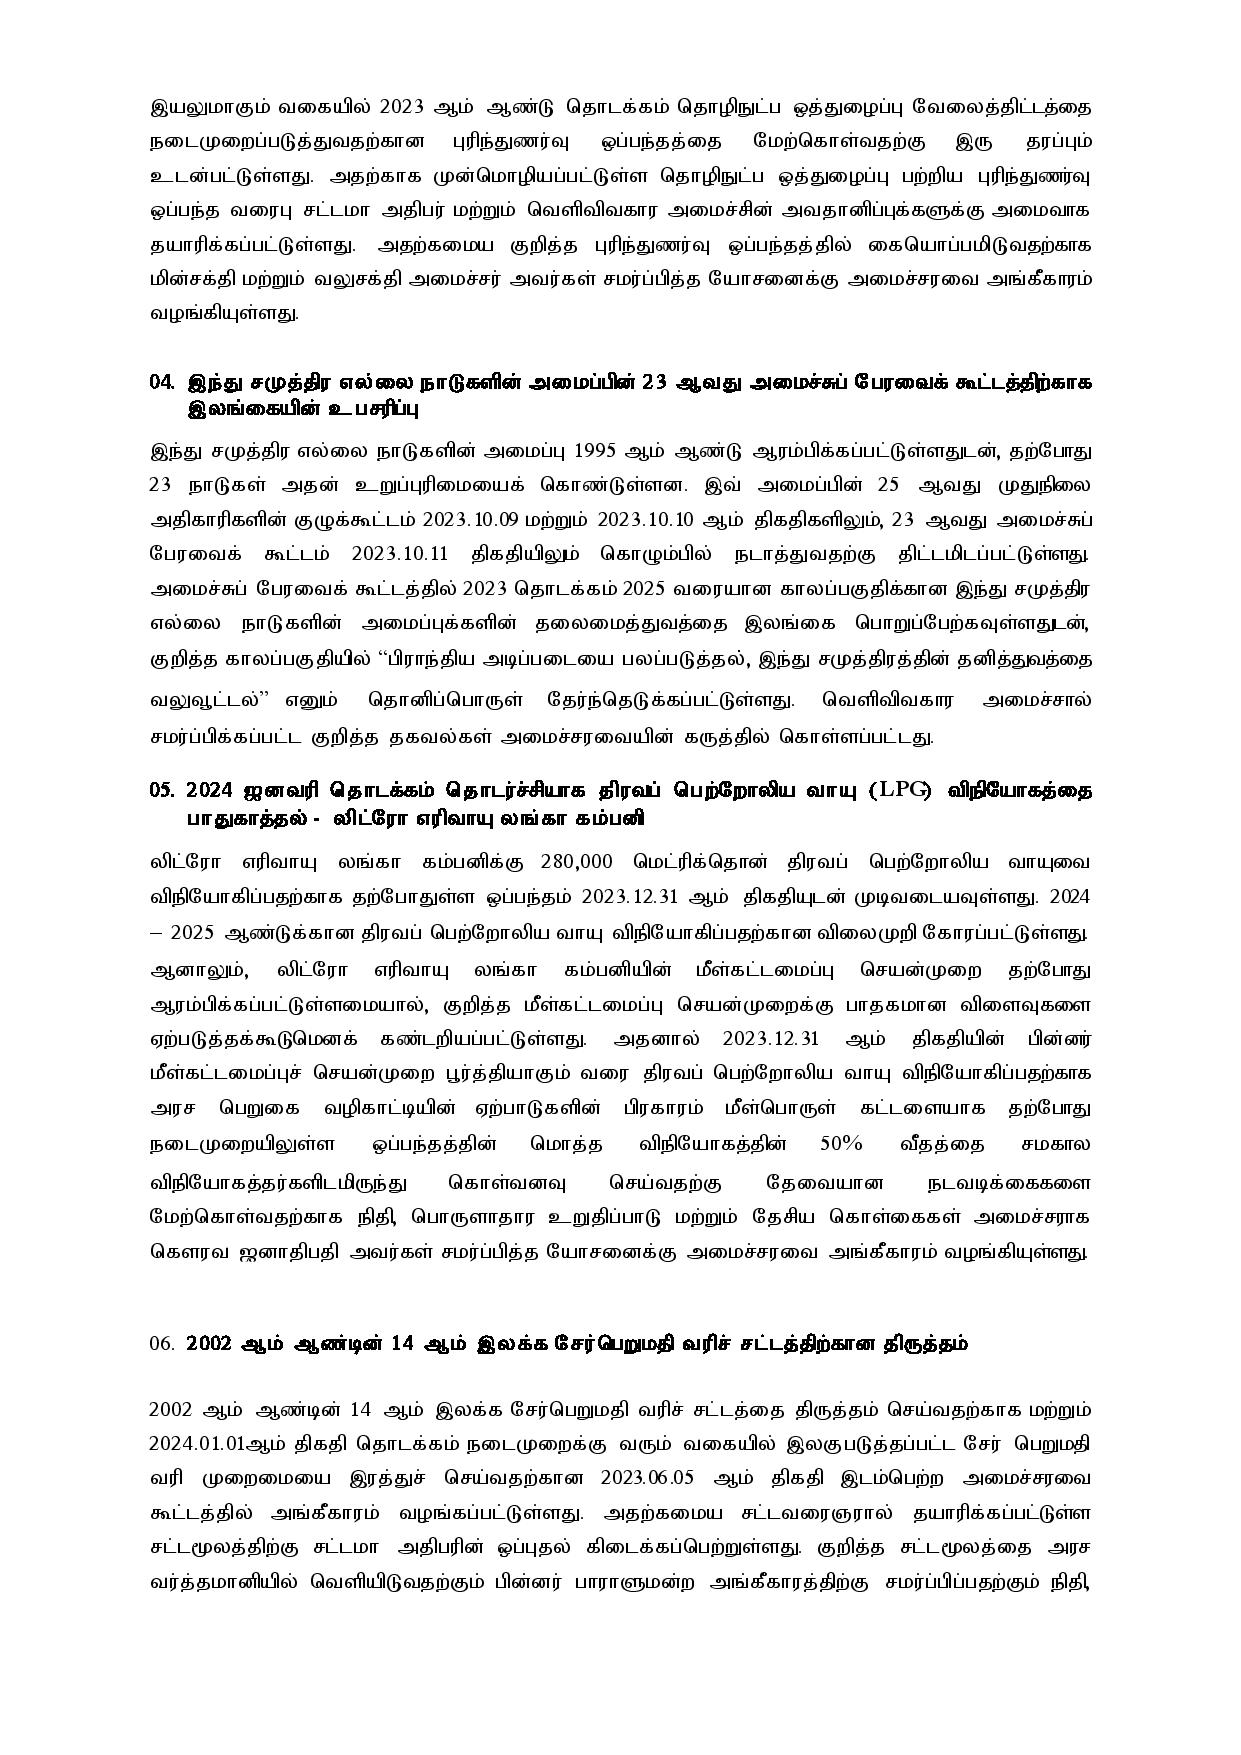 Cabinet Decision on 28.08.2023 Tamil page 002